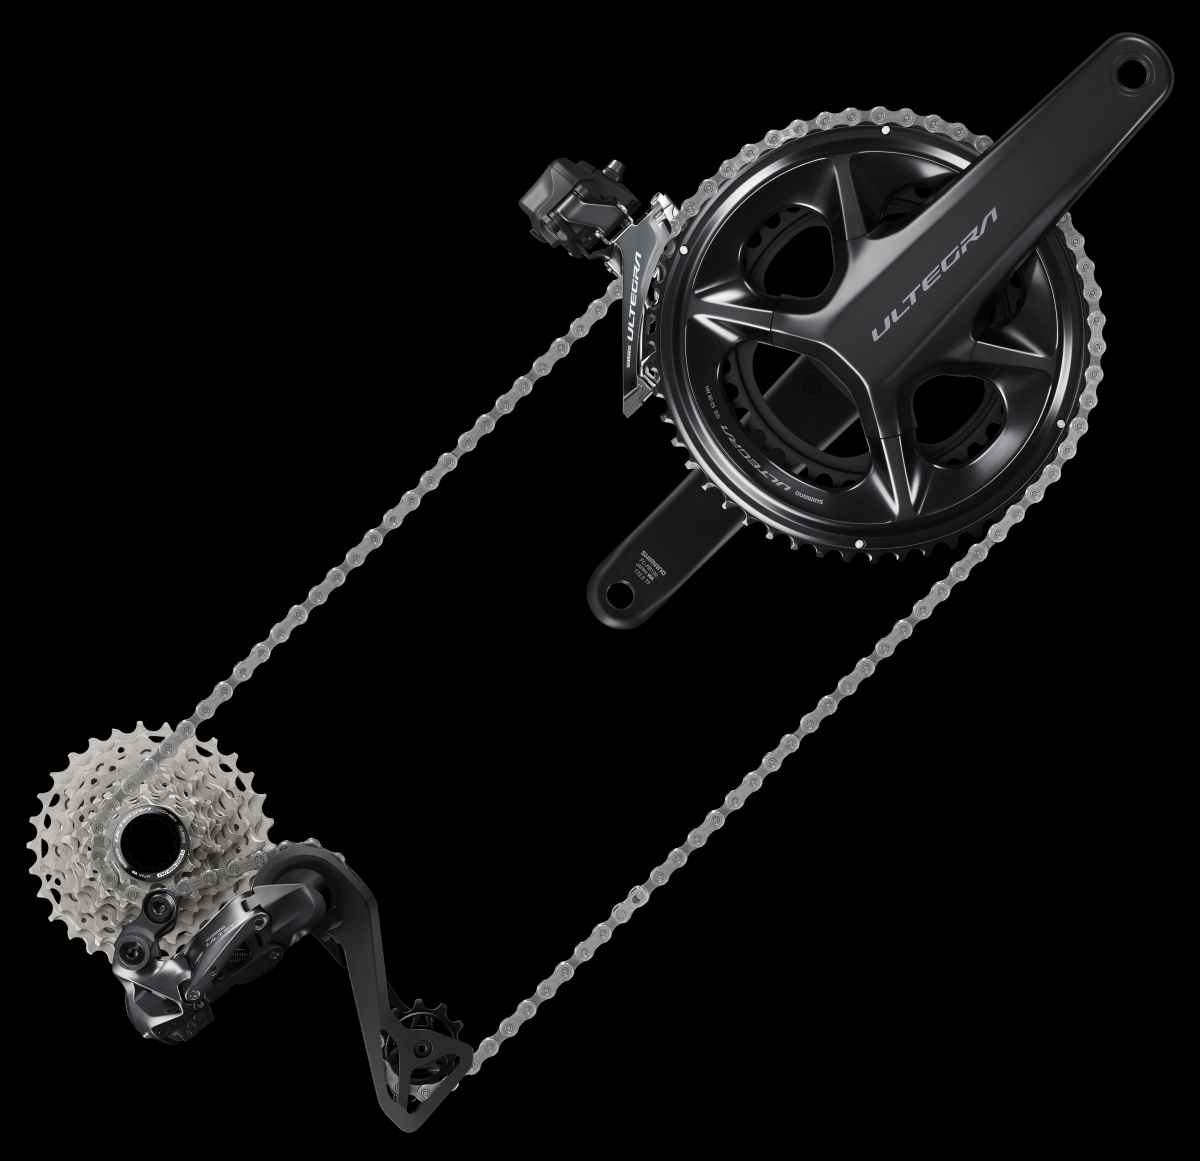 Shimano launches 12-Speed Ultegra R8100 Wireless Cockpit, Faster Shifting + Improved Brakes - No New Standards / Freehubs! - Gravel Cyclist: The Gravel Cycling Experience